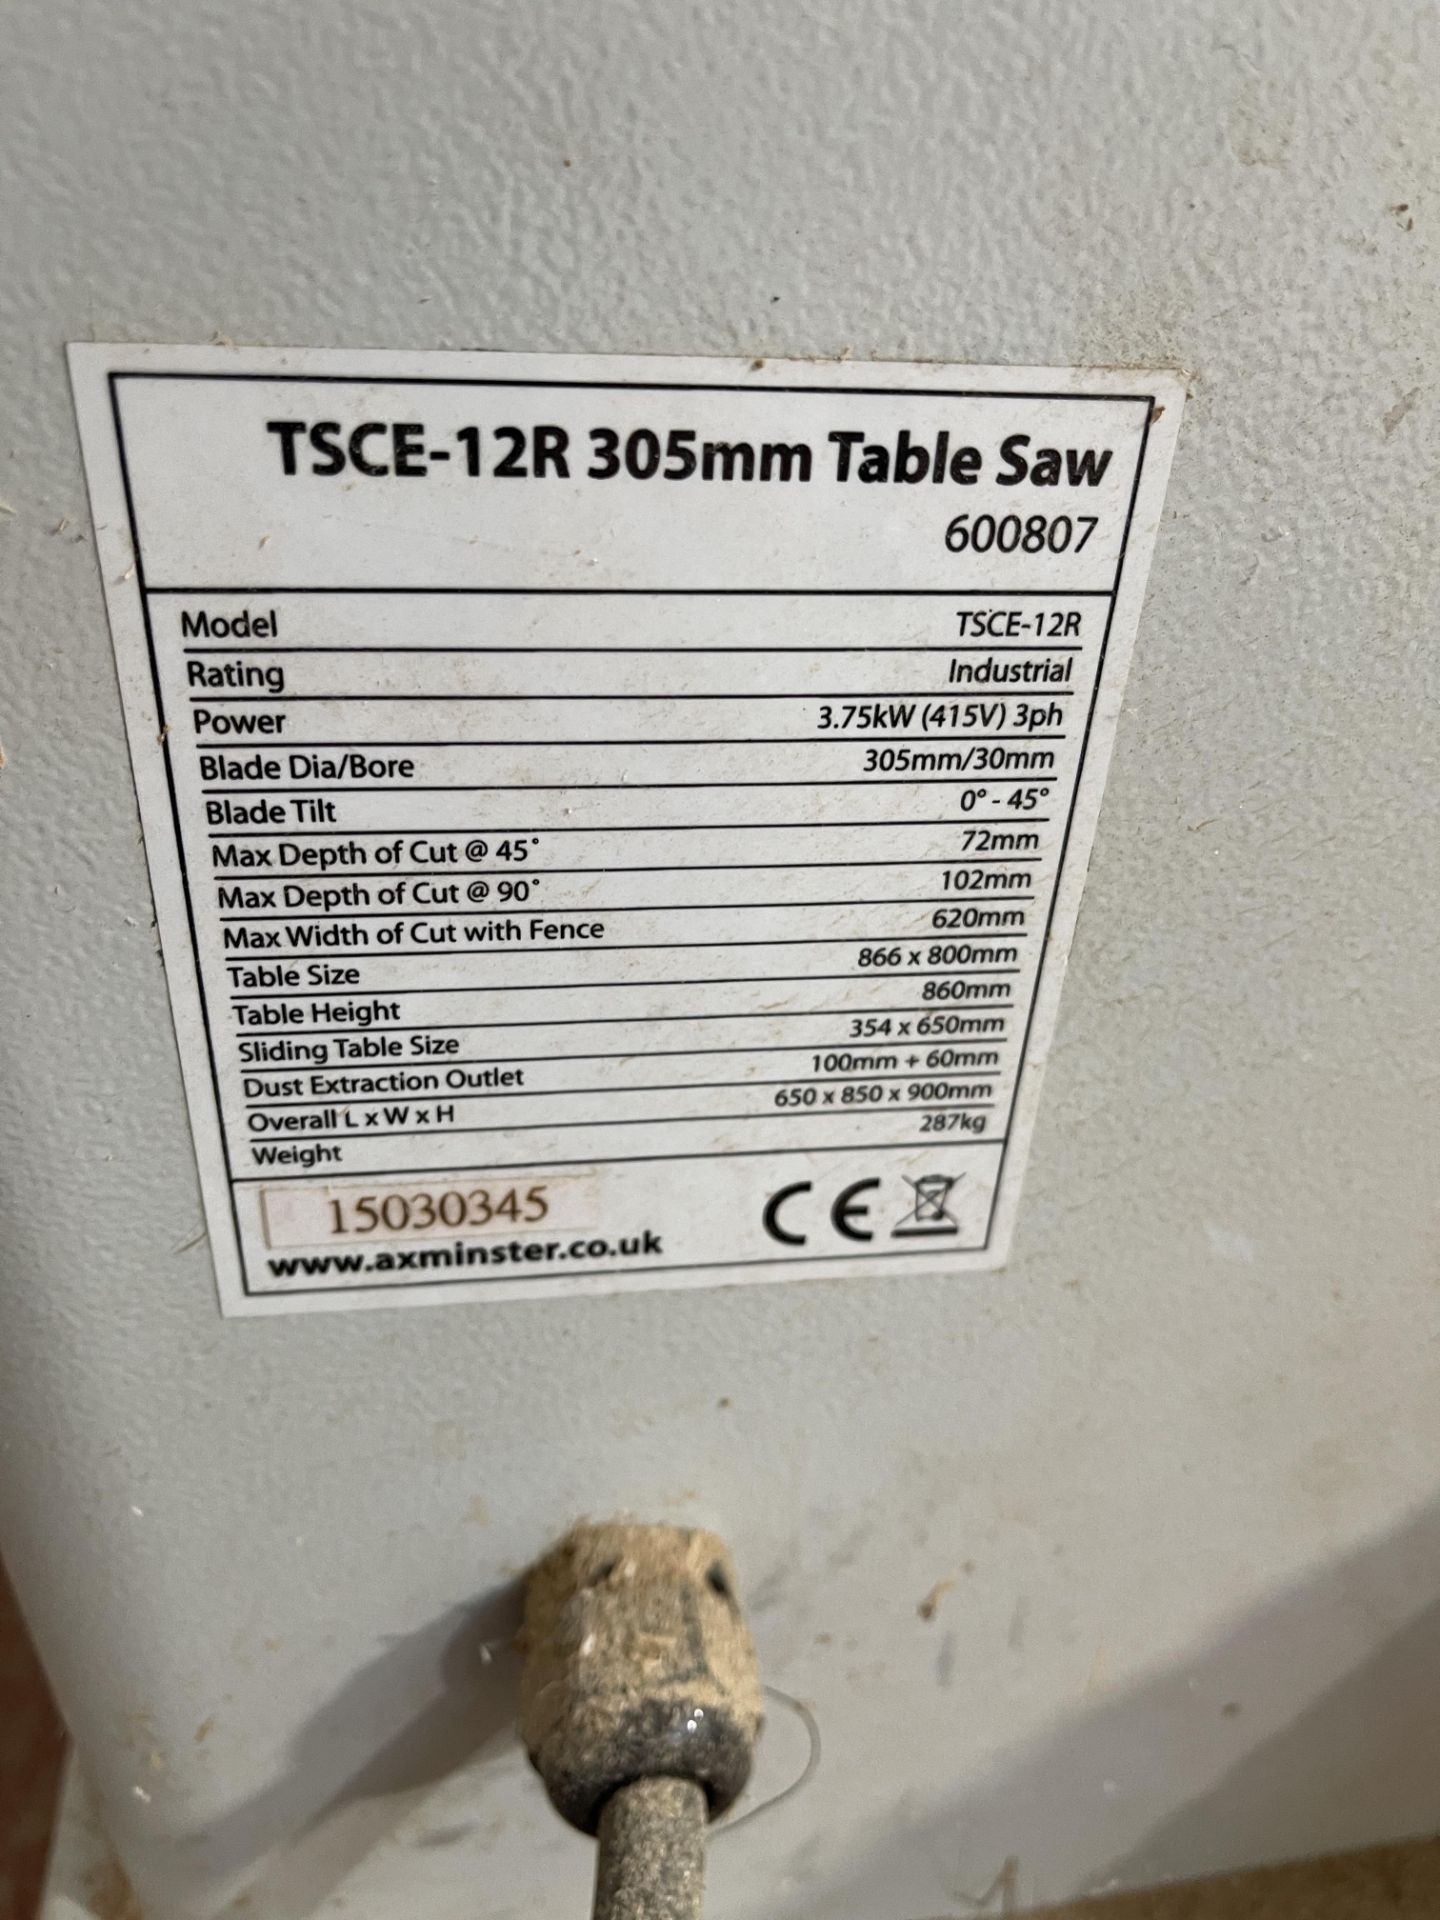 Axminster TSCE-12R 305mm Table Saw, Serial No. 15030345, 3 Phase - Image 2 of 5